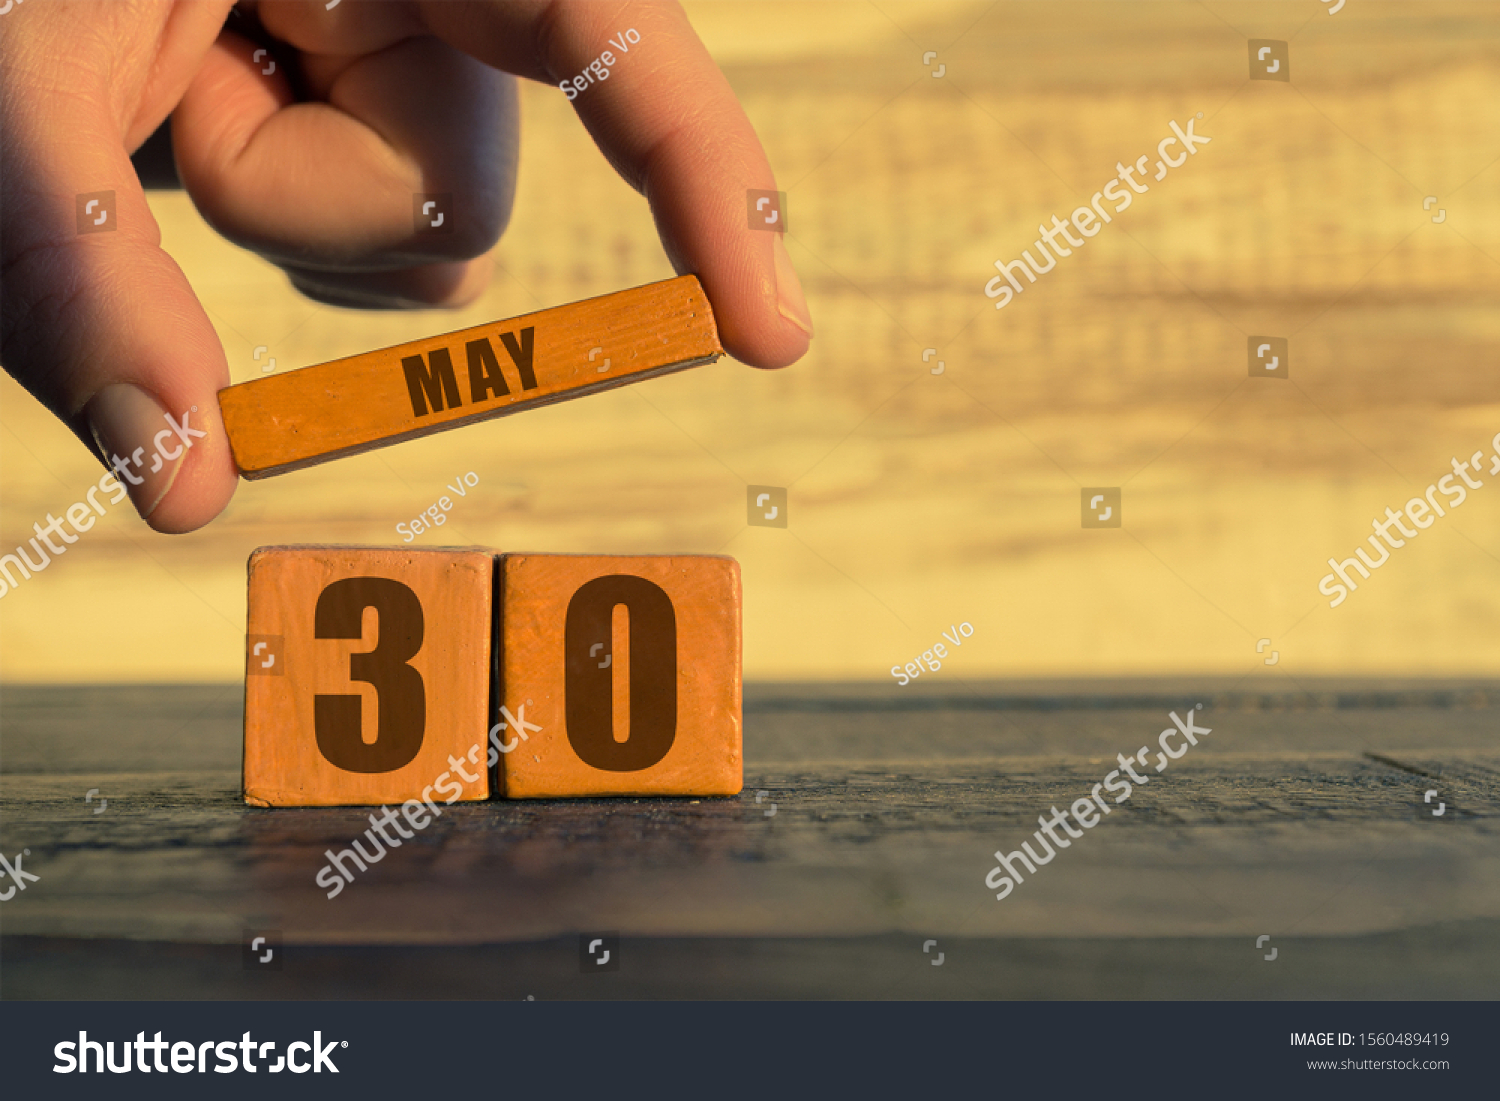 May 30th Day 30 Month Calendar Stock Photo 1560489419 Shutterstock